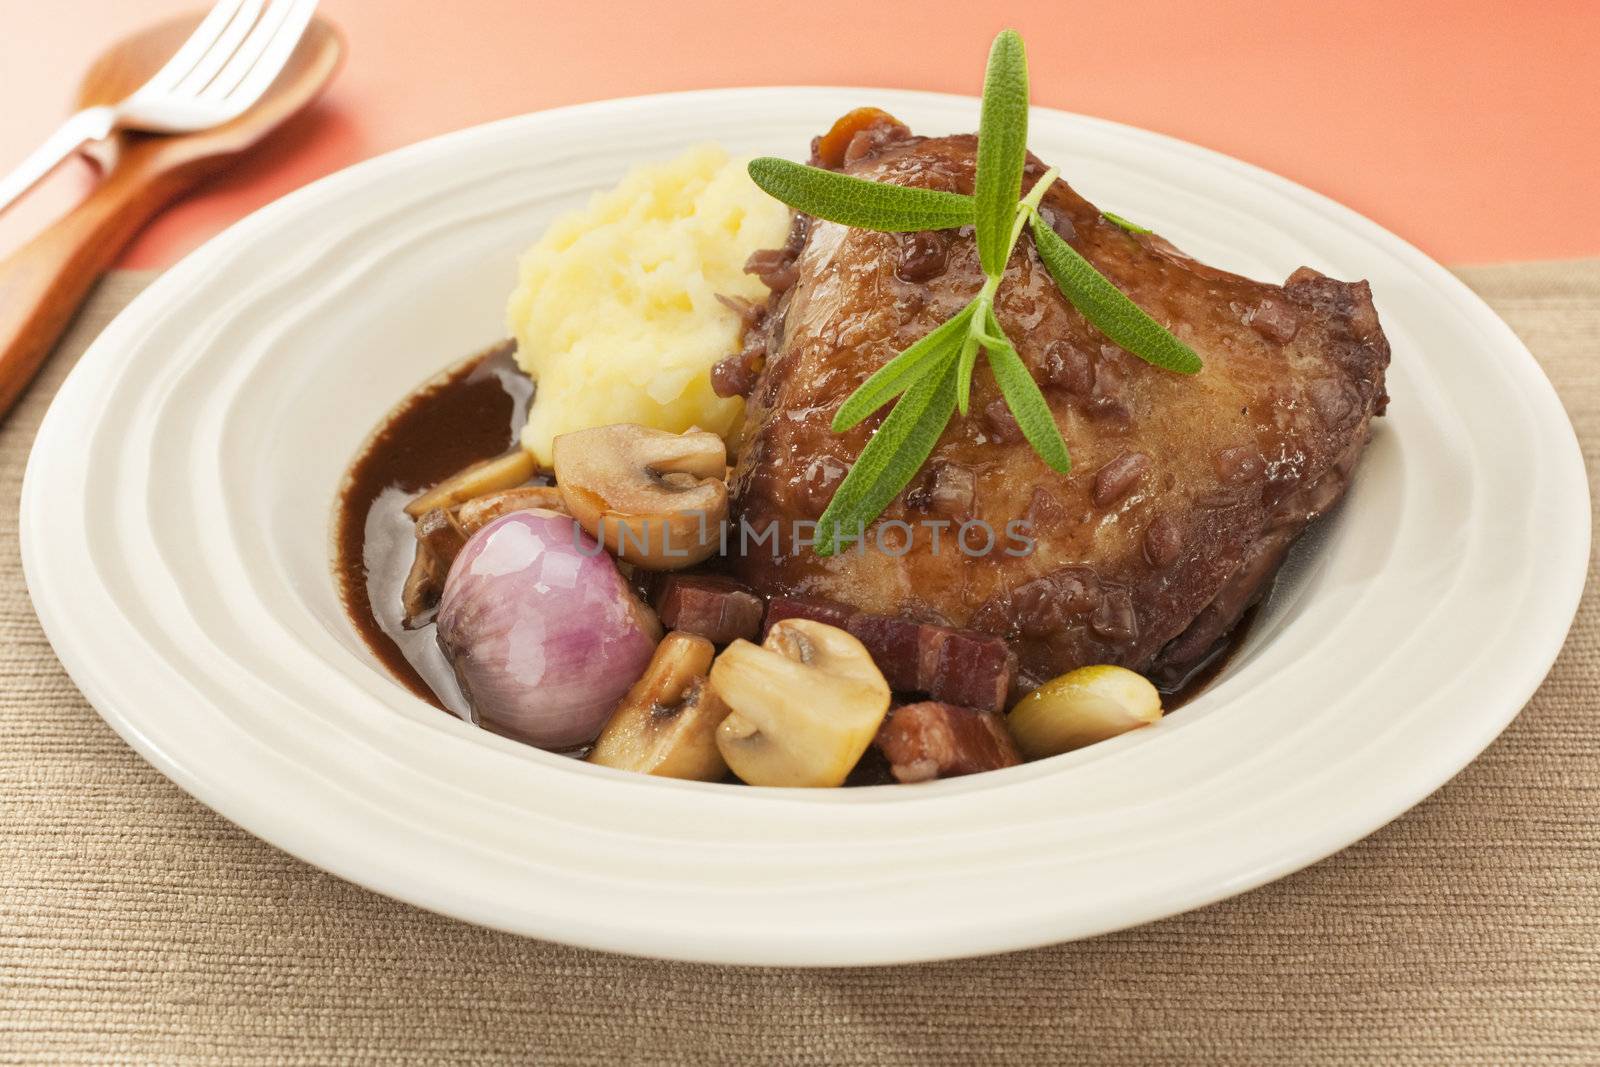 Coq au Vin Chicken in Red Wine by Travelling-light